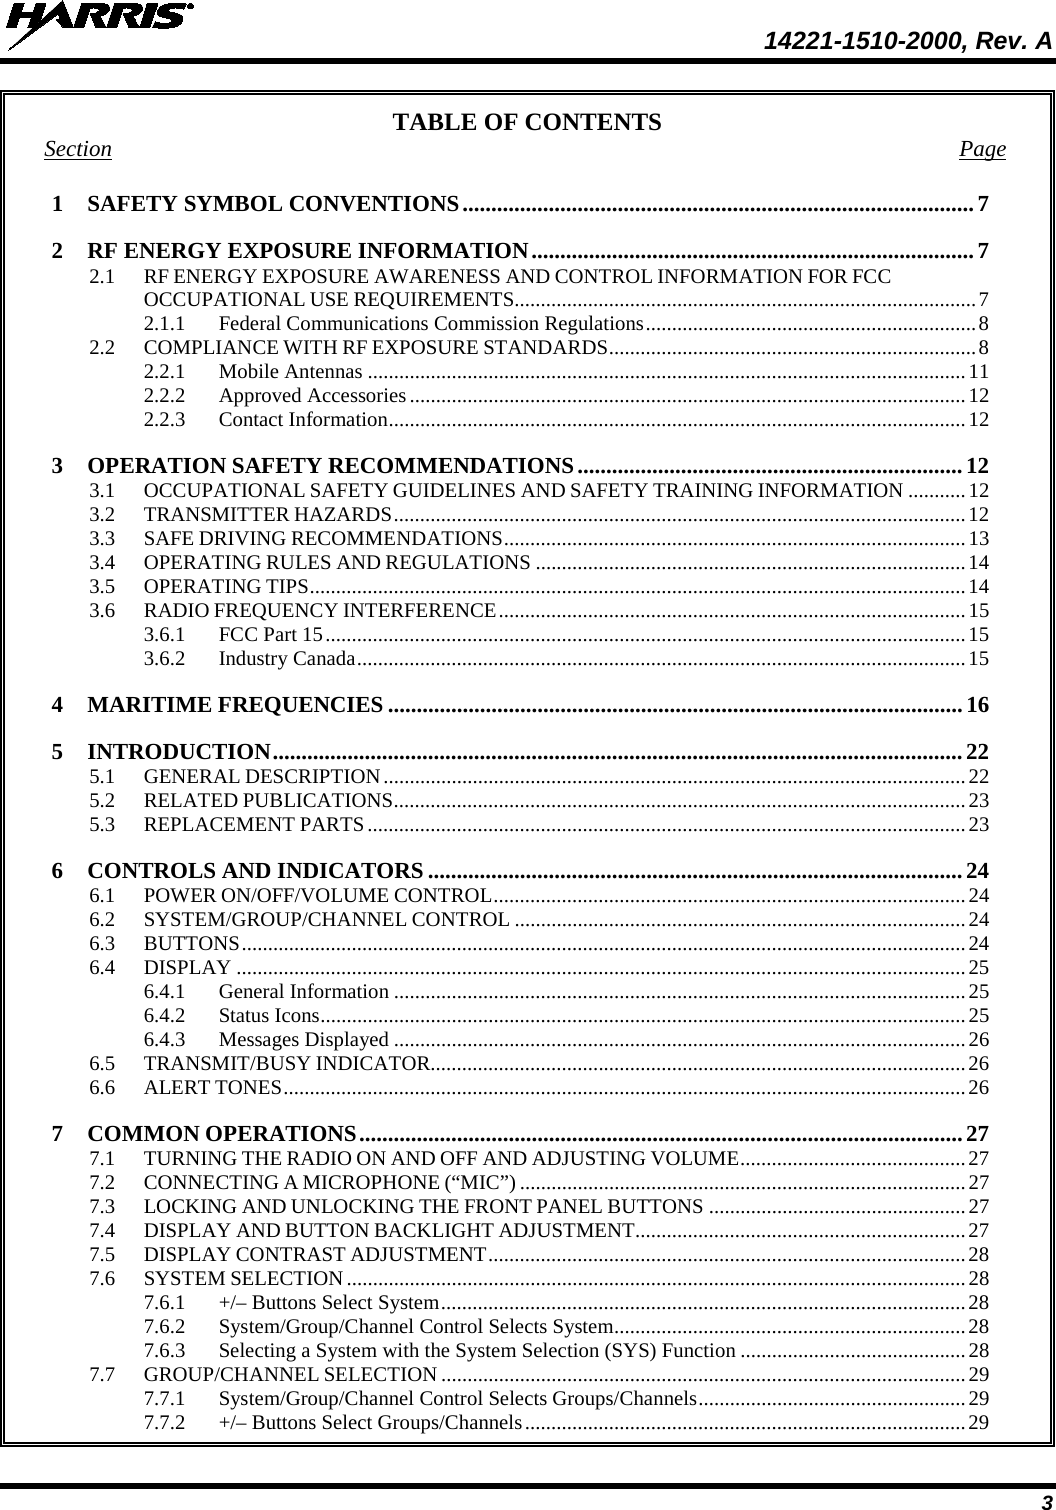  14221-1510-2000, Rev. A 3 TABLE OF CONTENTS Section  Page 1 SAFETY SYMBOL CONVENTIONS ......................................................................................... 7 2 RF ENERGY EXPOSURE INFORMATION ............................................................................. 7 2.1 RF ENERGY EXPOSURE AWARENESS AND CONTROL INFORMATION FOR FCC OCCUPATIONAL USE REQUIREMENTS........................................................................................ 7 2.1.1 Federal Communications Commission Regulations ............................................................... 8 2.2 COMPLIANCE WITH RF EXPOSURE STANDARDS ...................................................................... 8 2.2.1 Mobile Antennas .................................................................................................................. 11 2.2.2 Approved Accessories .......................................................................................................... 12 2.2.3 Contact Information .............................................................................................................. 12 3 OPERATION SAFETY RECOMMENDATIONS ................................................................... 12 3.1 OCCUPATIONAL SAFETY GUIDELINES AND SAFETY TRAINING INFORMATION ........... 12 3.2 TRANSMITTER HAZARDS ............................................................................................................. 12 3.3 SAFE DRIVING RECOMMENDATIONS ........................................................................................ 13 3.4 OPERATING RULES AND REGULATIONS .................................................................................. 14 3.5 OPERATING TIPS ............................................................................................................................. 14 3.6 RADIO FREQUENCY INTERFERENCE ......................................................................................... 15 3.6.1 FCC Part 15 .......................................................................................................................... 15 3.6.2 Industry Canada .................................................................................................................... 15 4 MARITIME FREQUENCIES .................................................................................................... 16 5 INTRODUCTION ........................................................................................................................ 22 5.1 GENERAL DESCRIPTION ............................................................................................................... 22 5.2 RELATED PUBLICATIONS ............................................................................................................. 23 5.3 REPLACEMENT PARTS .................................................................................................................. 23 6 CONTROLS AND INDICATORS ............................................................................................. 24 6.1 POWER ON/OFF/VOLUME CONTROL .......................................................................................... 24 6.2 SYSTEM/GROUP/CHANNEL CONTROL ...................................................................................... 24 6.3 BUTTONS .......................................................................................................................................... 24 6.4 DISPLAY ........................................................................................................................................... 25 6.4.1 General Information ............................................................................................................. 25 6.4.2 Status Icons ........................................................................................................................... 25 6.4.3 Messages Displayed ............................................................................................................. 26 6.5 TRANSMIT/BUSY INDICATOR...................................................................................................... 26 6.6 ALERT TONES .................................................................................................................................. 26 7 COMMON OPERATIONS ......................................................................................................... 27 7.1 TURNING THE RADIO ON AND OFF AND ADJUSTING VOLUME ........................................... 27 7.2 CONNECTING A MICROPHONE (“MIC”) ..................................................................................... 27 7.3 LOCKING AND UNLOCKING THE FRONT PANEL BUTTONS ................................................. 27 7.4 DISPLAY AND BUTTON BACKLIGHT ADJUSTMENT ............................................................... 27 7.5 DISPLAY CONTRAST ADJUSTMENT ........................................................................................... 28 7.6 SYSTEM SELECTION ...................................................................................................................... 28 7.6.1 +/– Buttons Select System .................................................................................................... 28 7.6.2 System/Group/Channel Control Selects System ................................................................... 28 7.6.3 Selecting a System with the System Selection (SYS) Function ........................................... 28 7.7 GROUP/CHANNEL SELECTION .................................................................................................... 29 7.7.1 System/Group/Channel Control Selects Groups/Channels ................................................... 29 7.7.2 +/– Buttons Select Groups/Channels .................................................................................... 29 